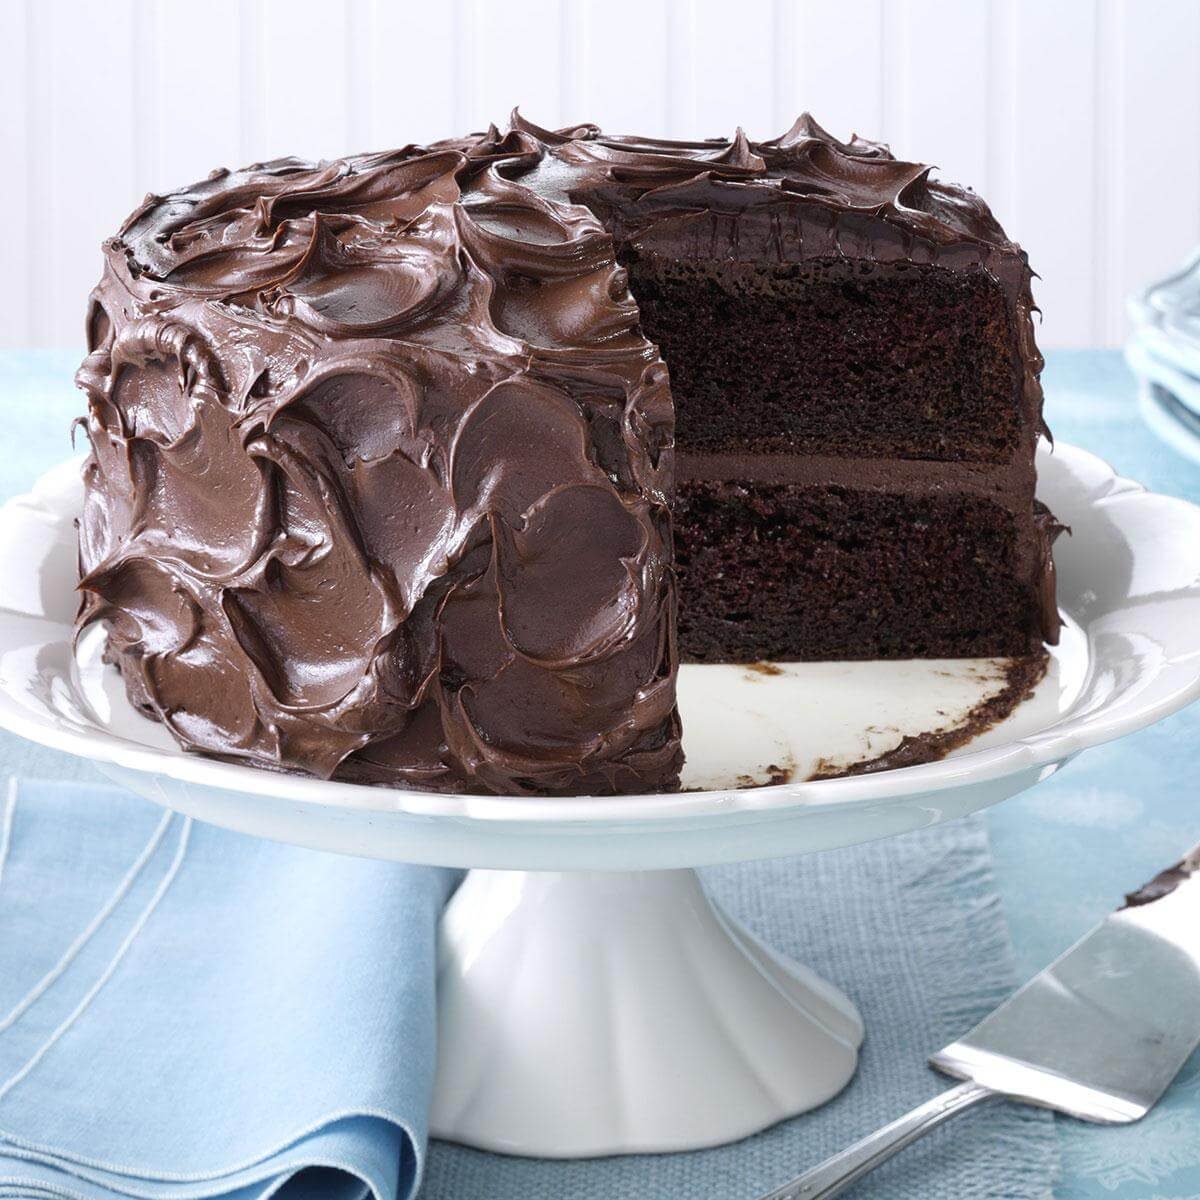 Our Best-Ever Chocolate Cake Recipes - Exps139320 CF2345613B06 21 4b WEB